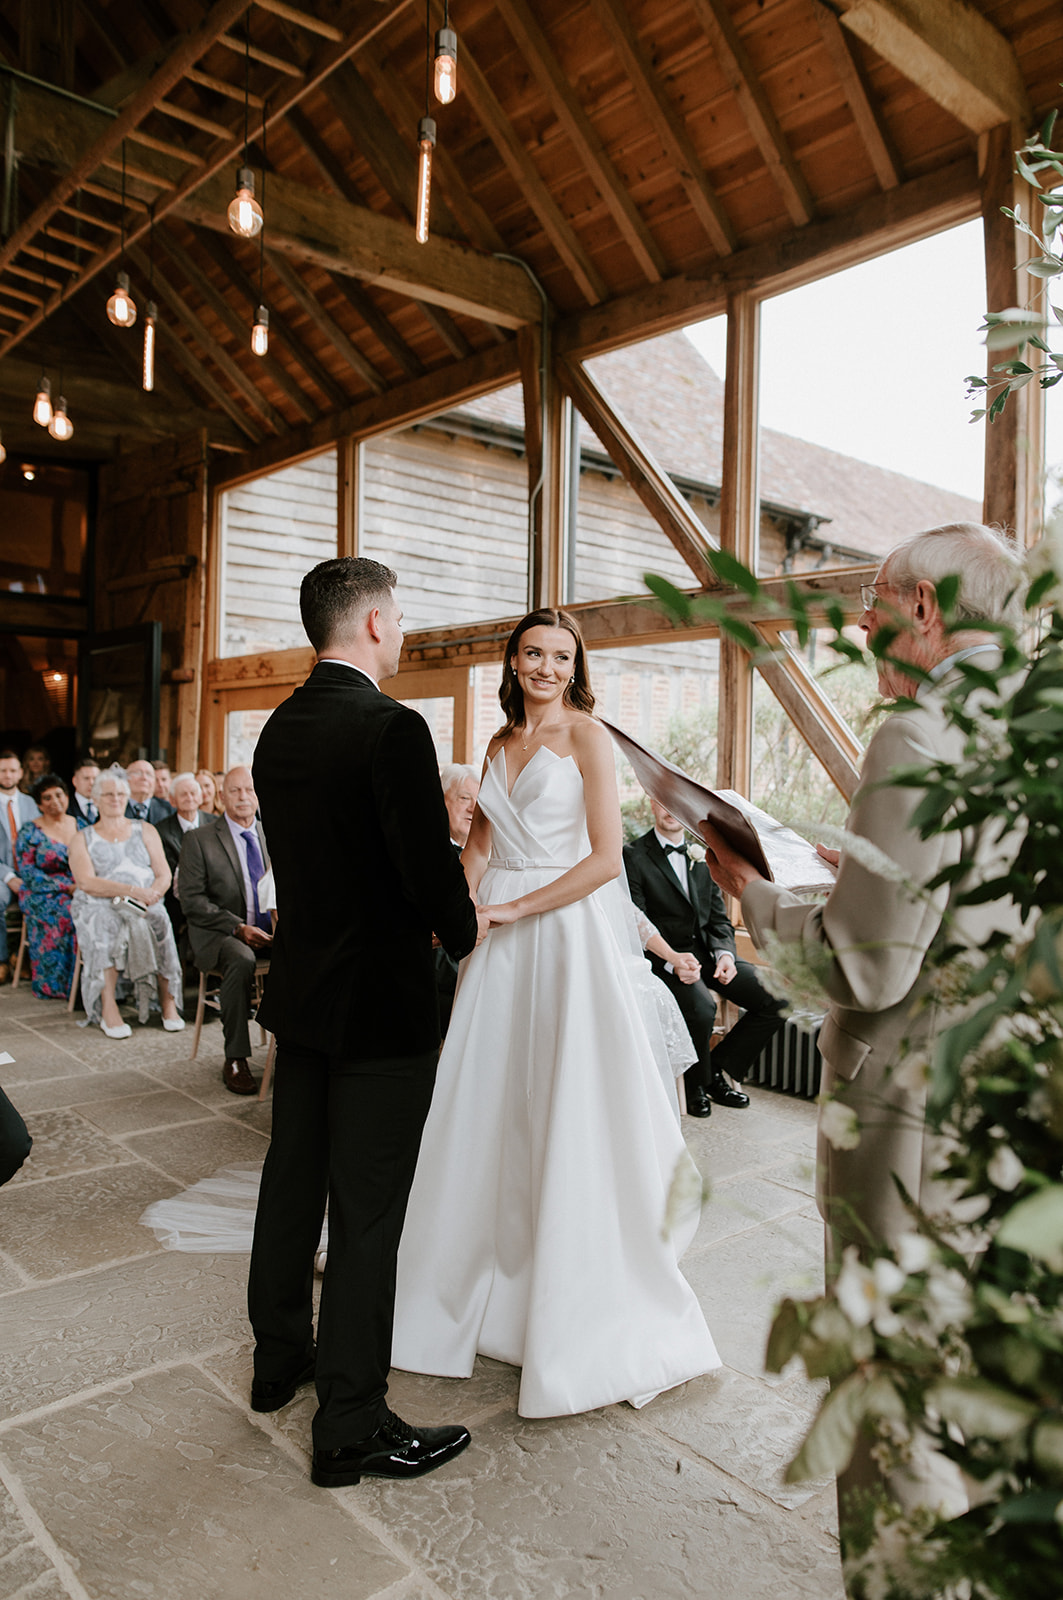 couple getting married exchanging vows at barns and yard wedding venue